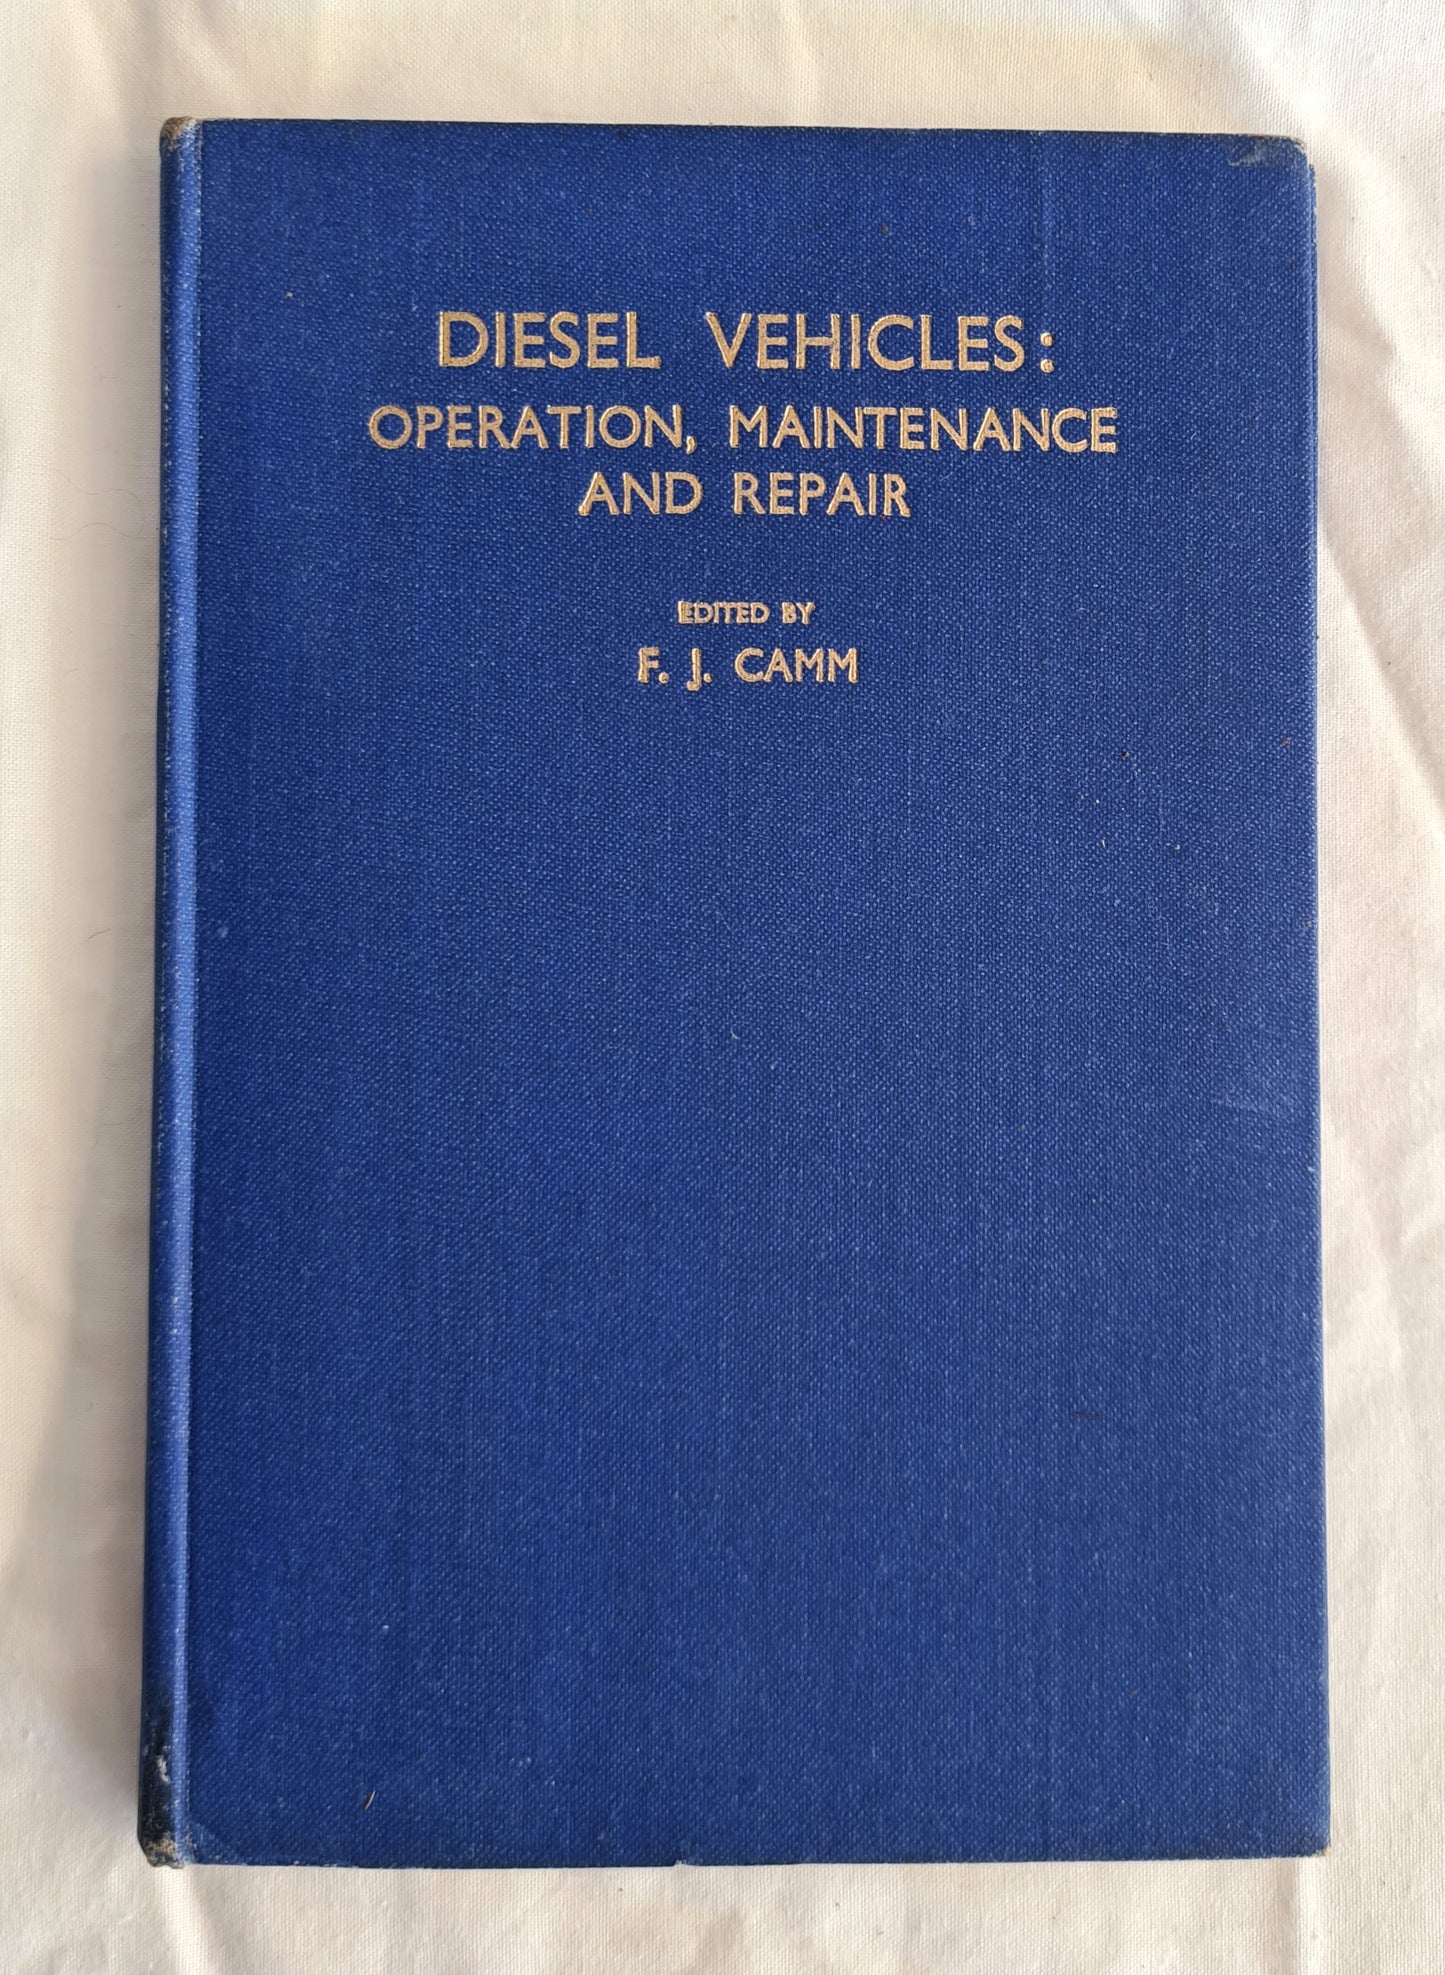 Diesel Vehicles: Operation, Maintenance and Repair  Edited by F. J. Camm